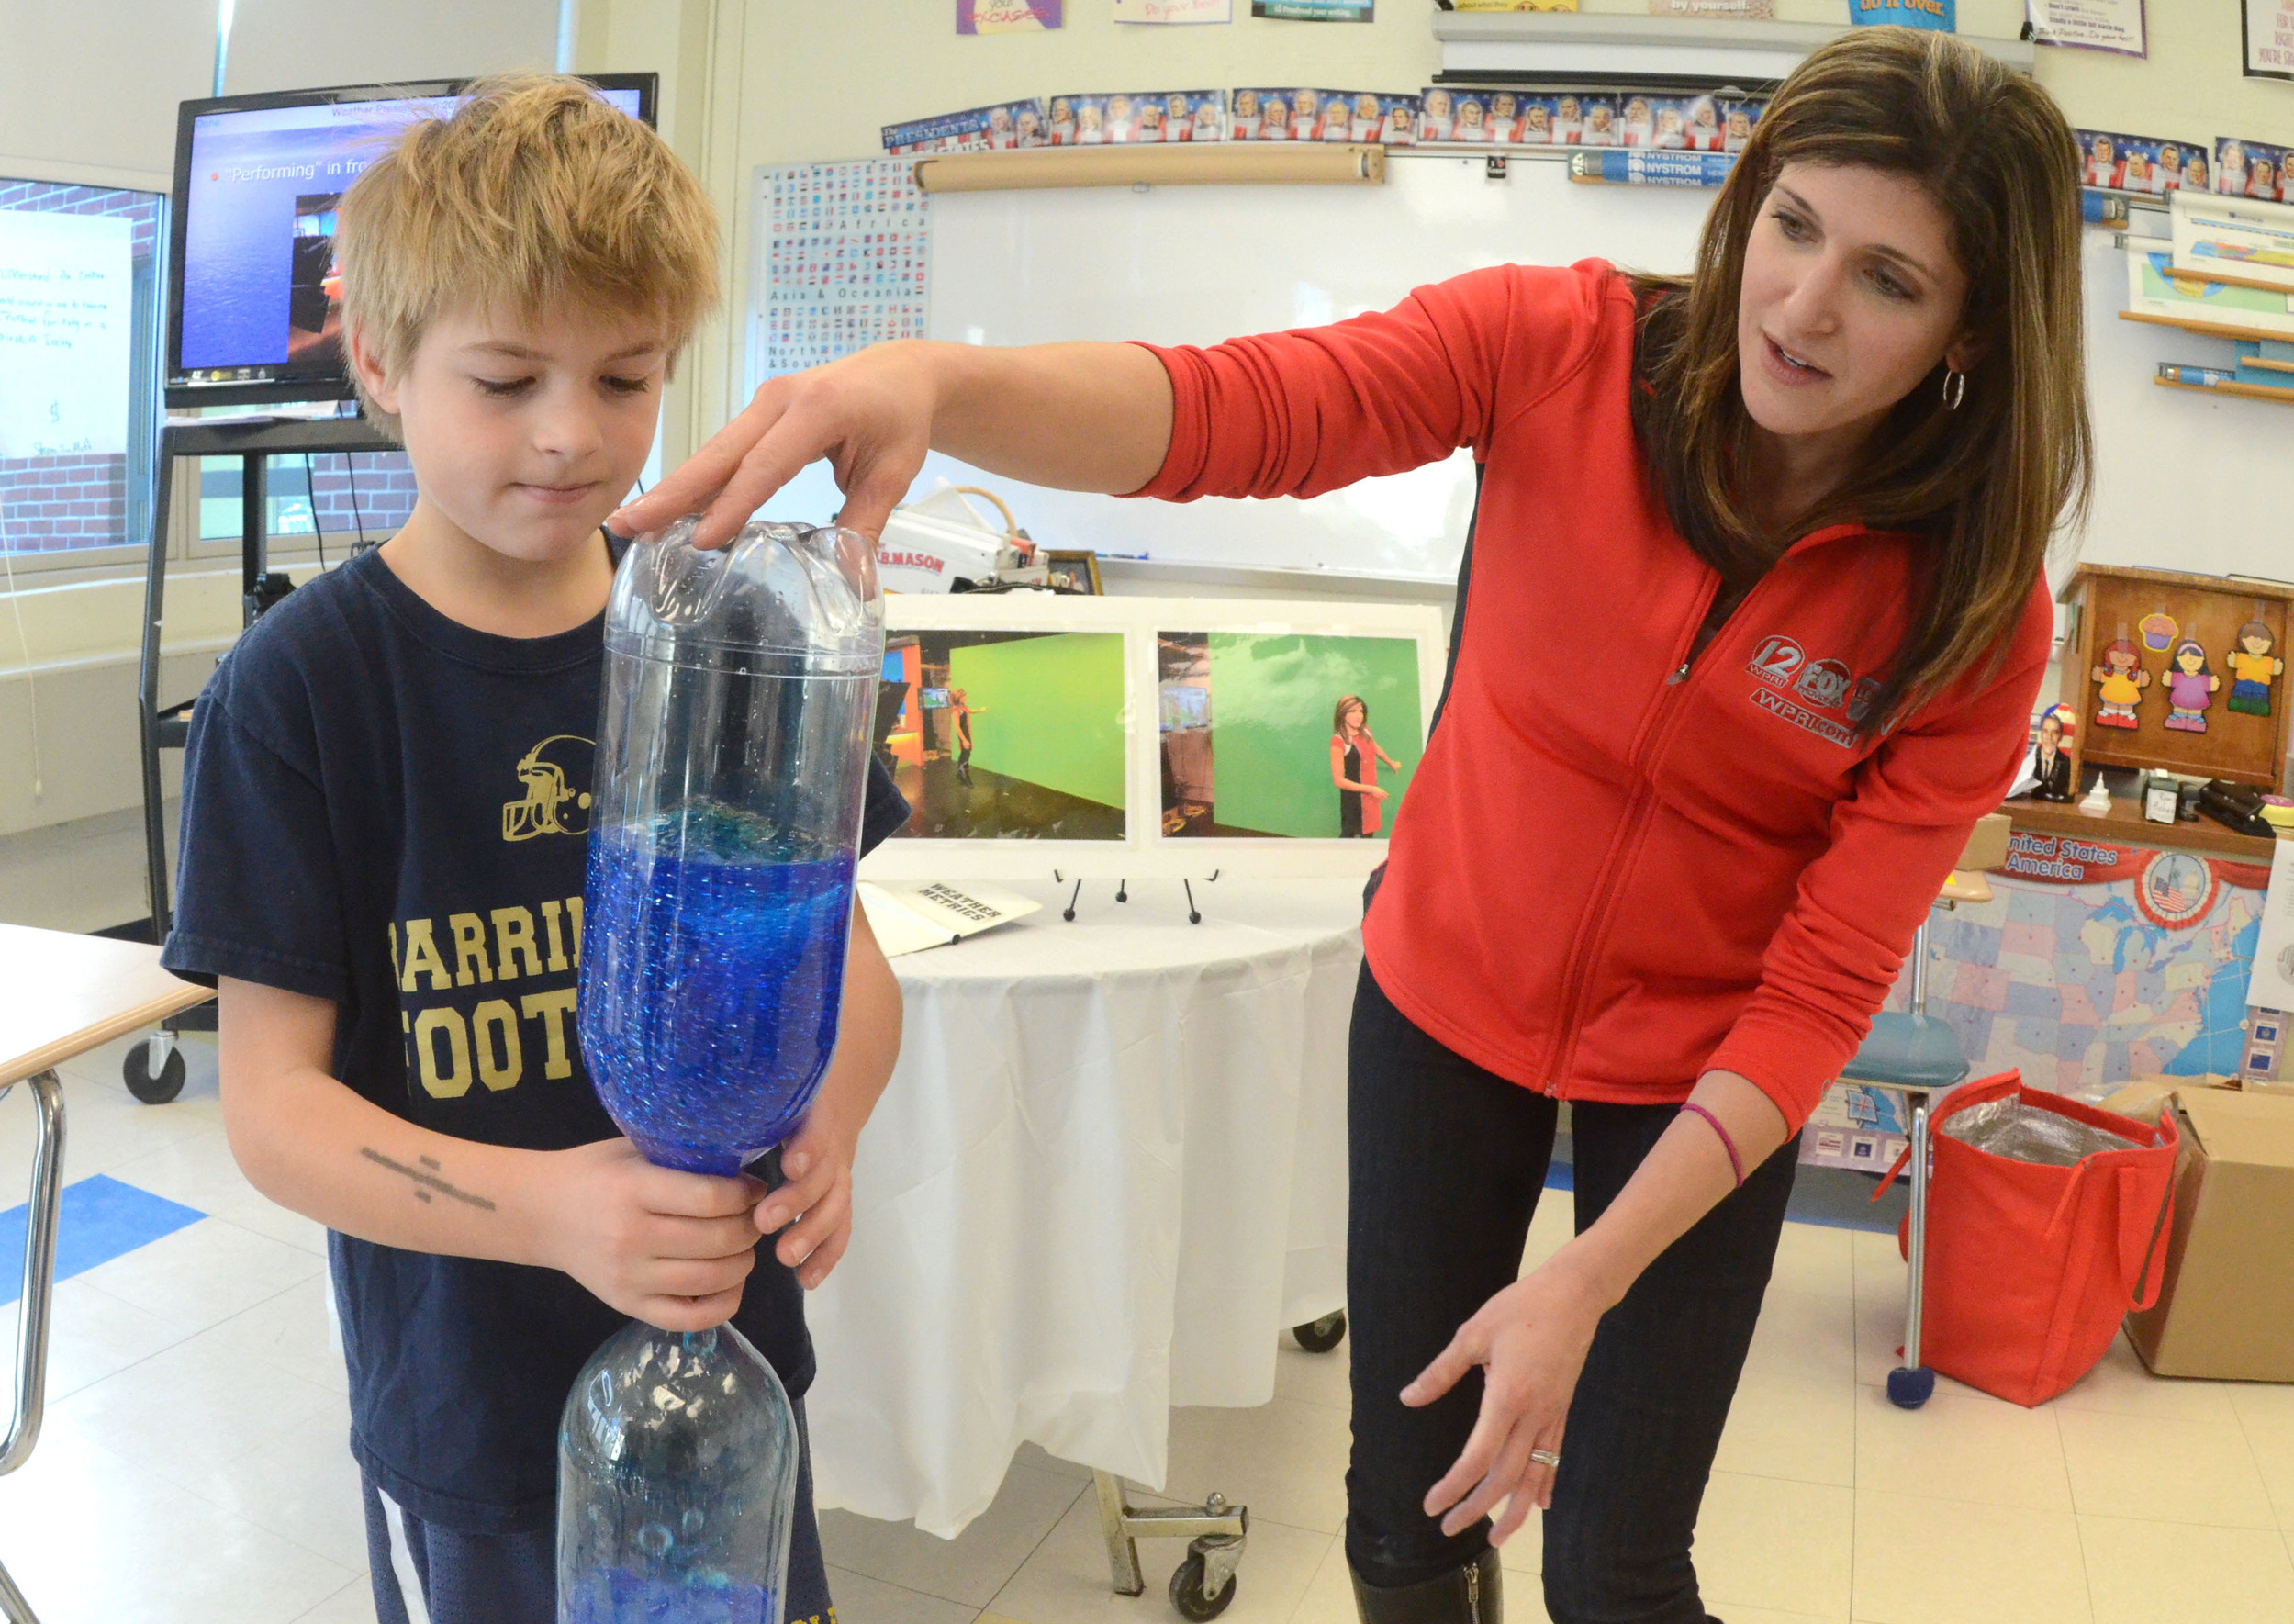 Michelle Muscatello stopped by last year's STEAM event, which was sponsored through a BEF grant.